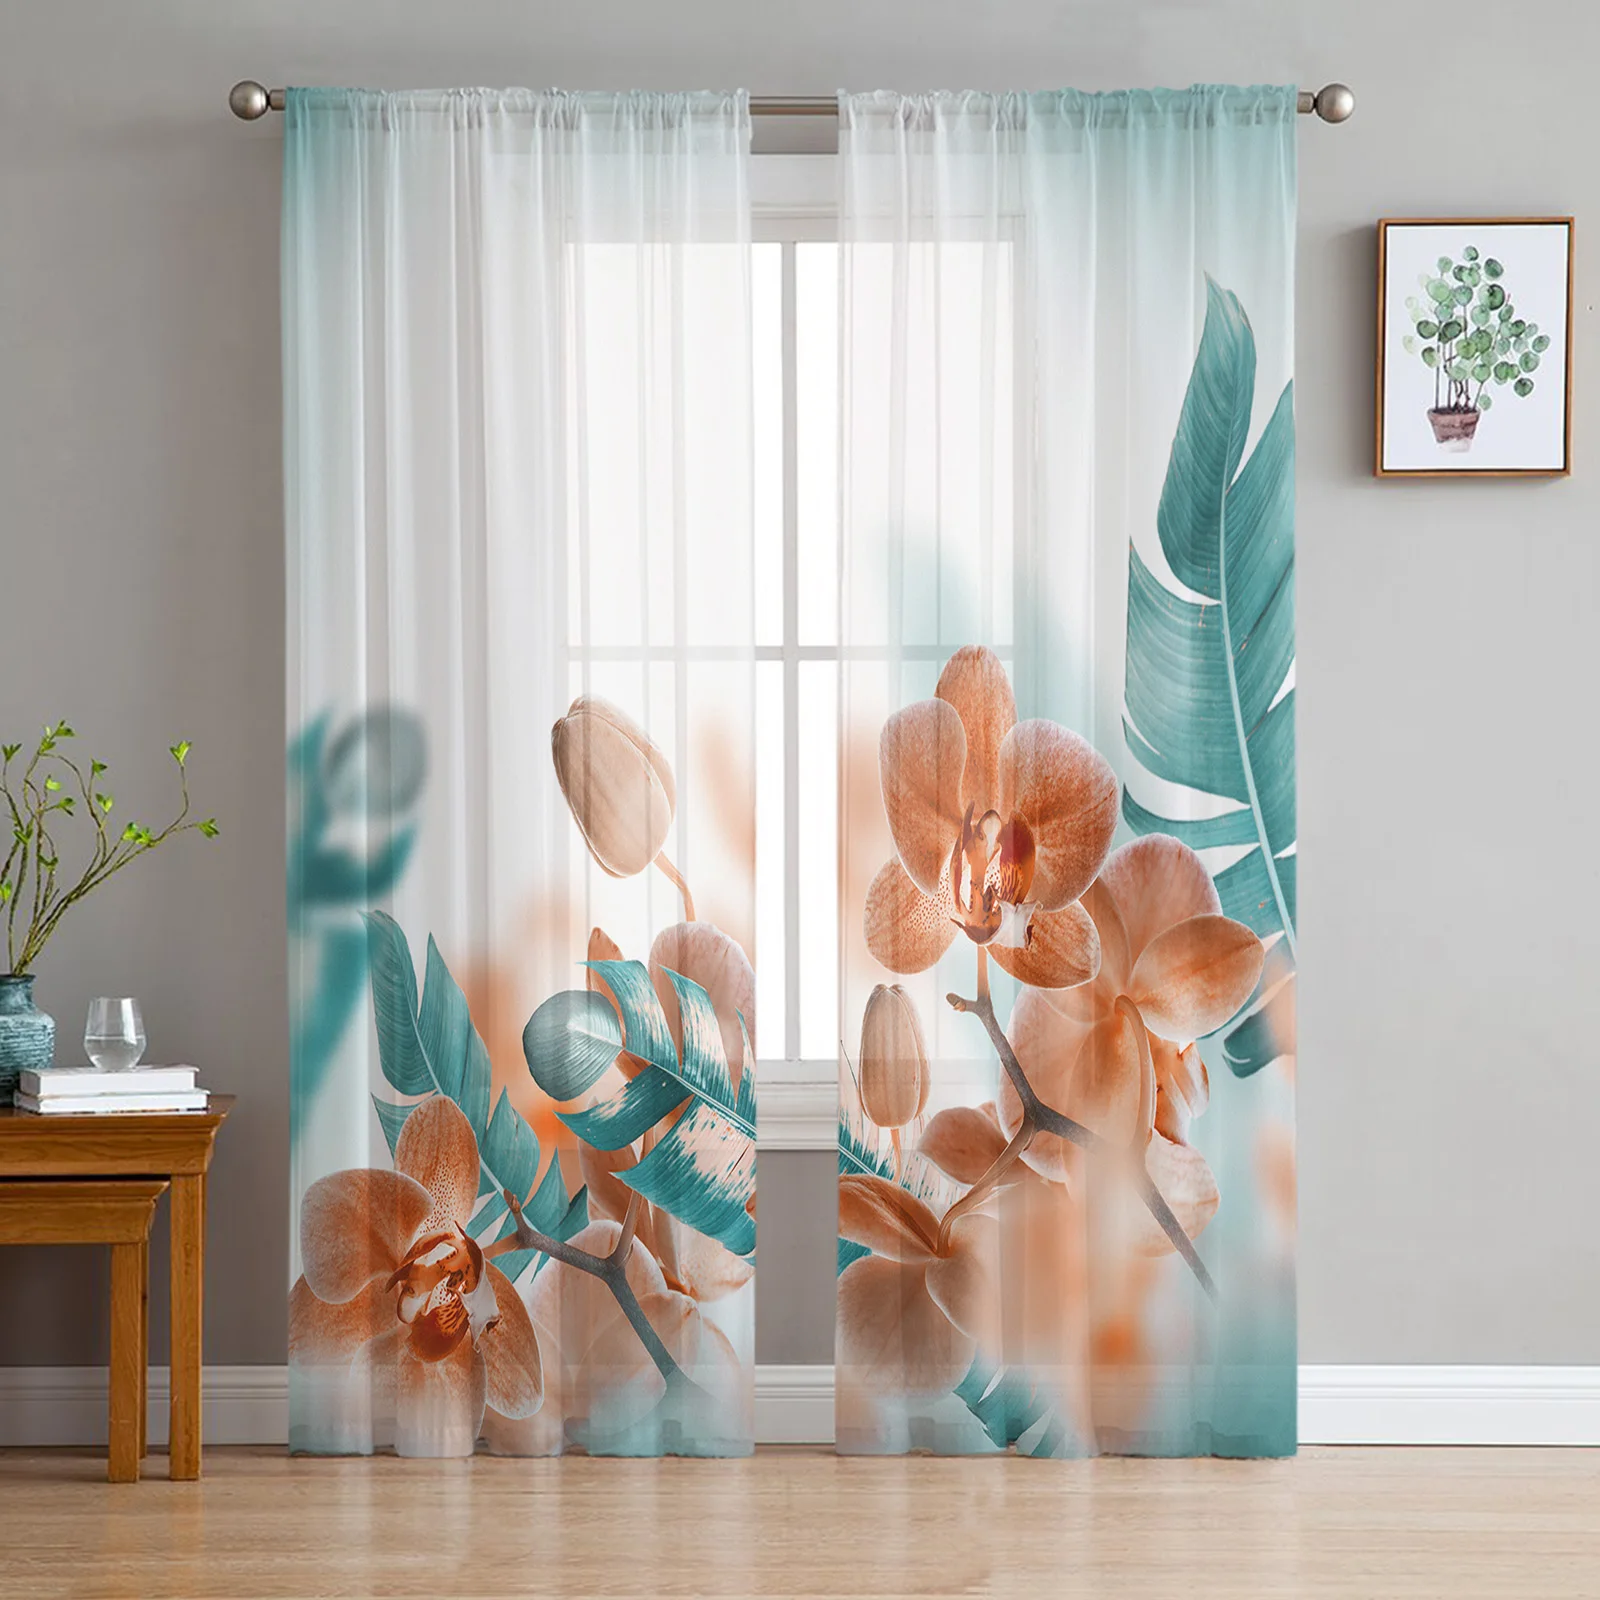 

Tropical Plant Decoration Sheer Curtains Tulle for Living Room Bedroom Kitchen Voile Drapes Home Decoration Window Treatment